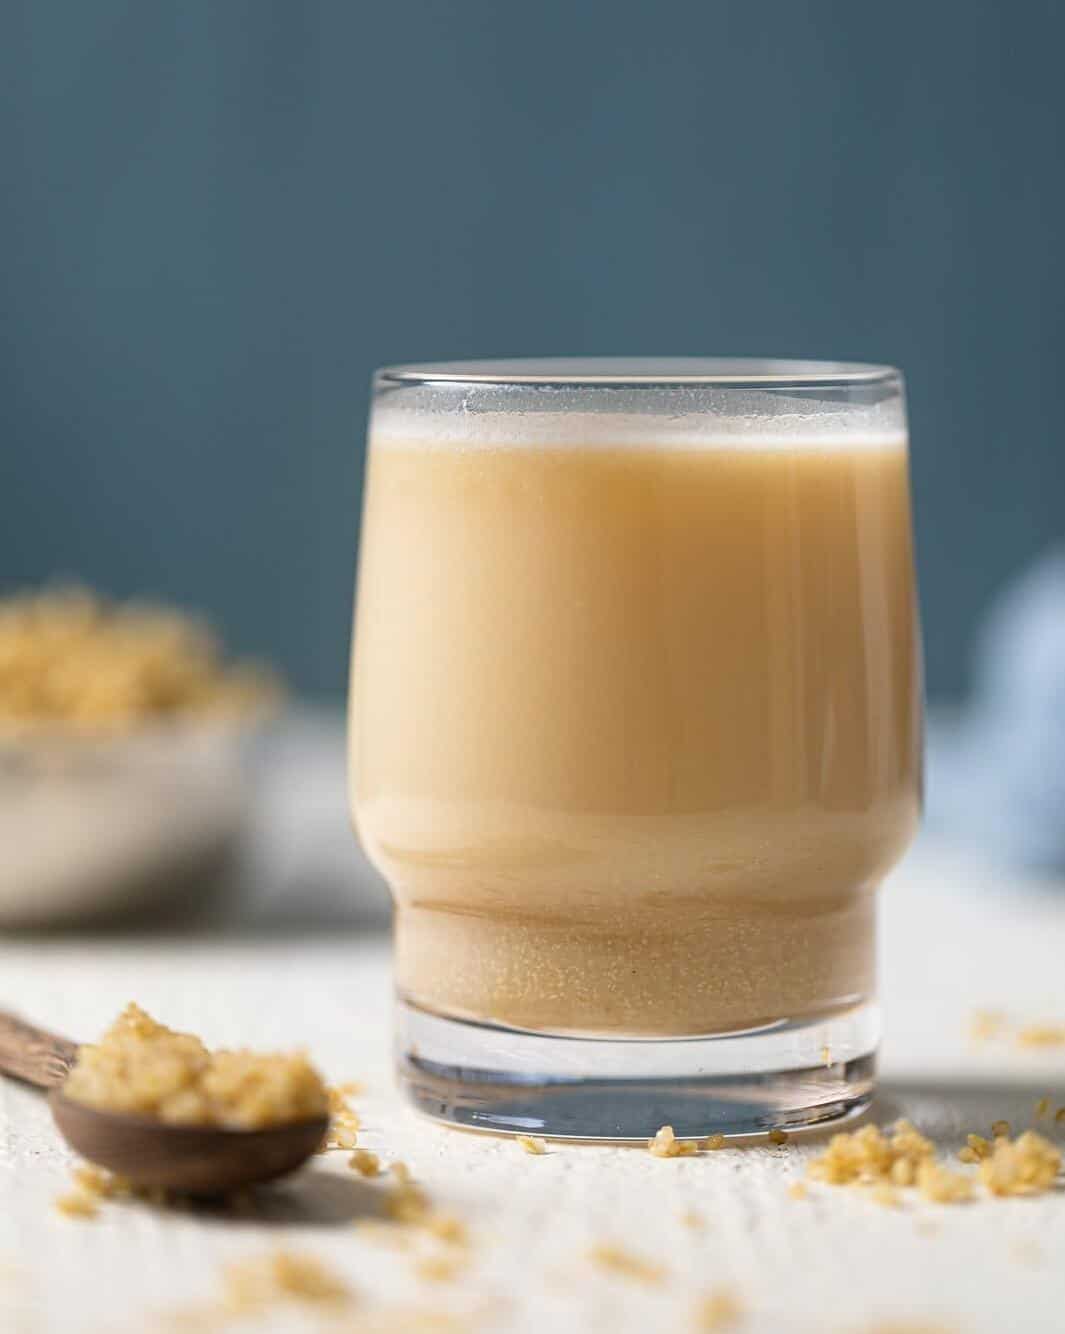  A glass of creamy and nutritious quinoa milk to start your day right!